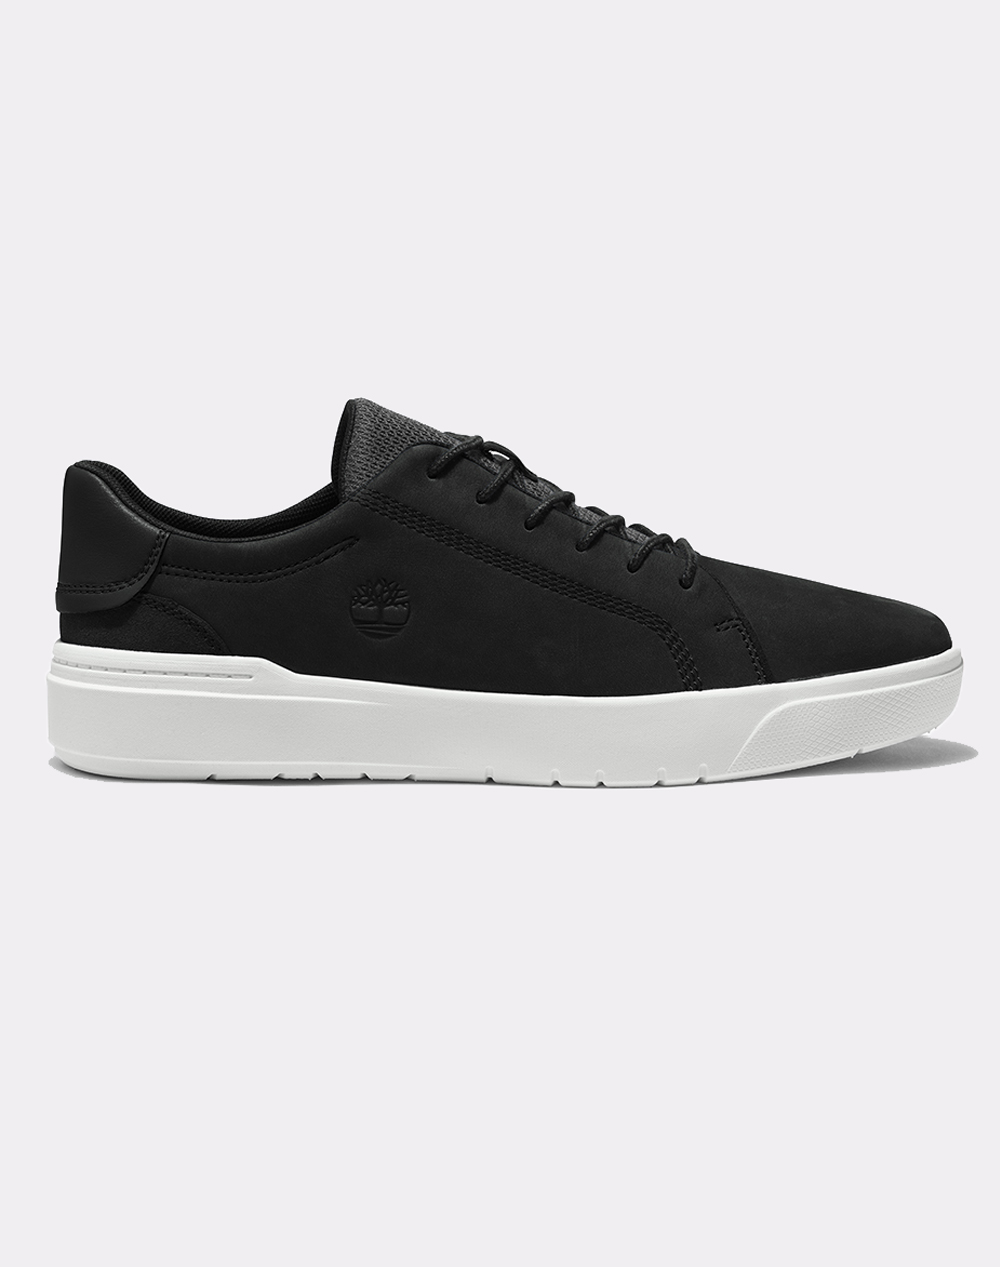 TIMBERLAND SEBY LOW LACE SNEAKER TB0A275R-015 Black